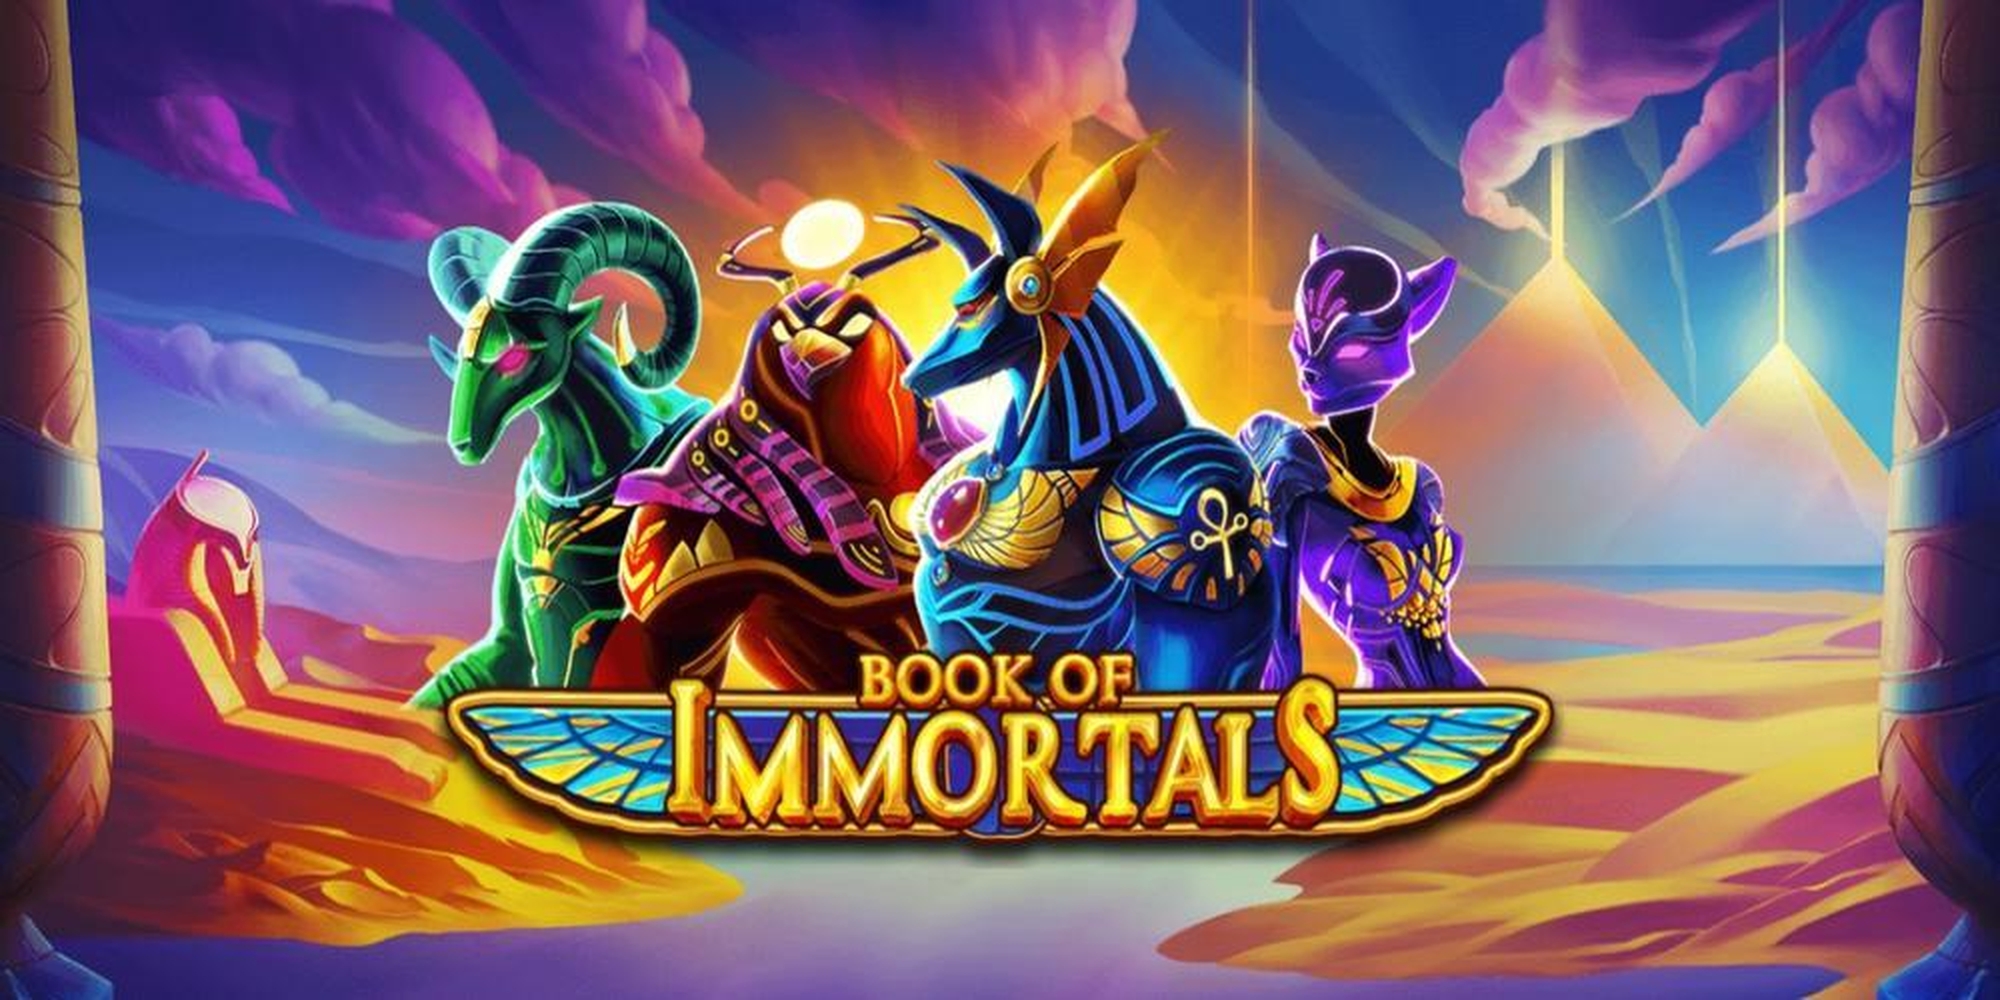 The Book of Immortals Online Slot Demo Game by iSoftBet